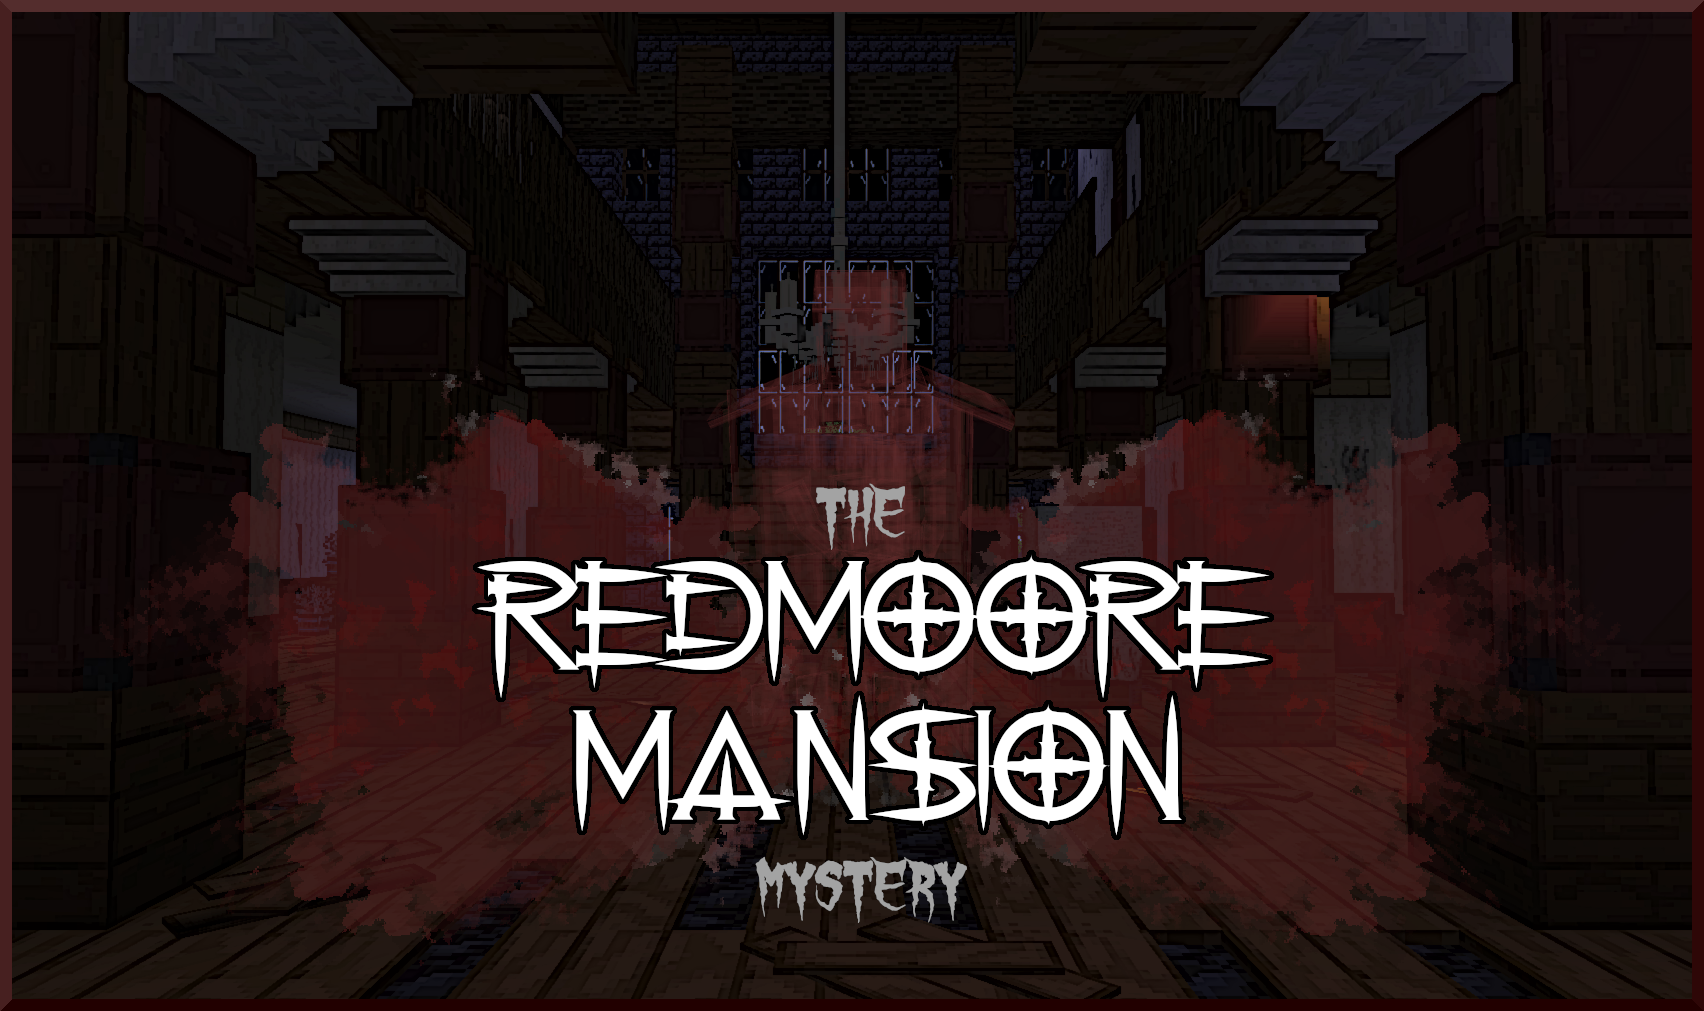 Download The Redmoore Mansion Mystery for Minecraft 1.16.5